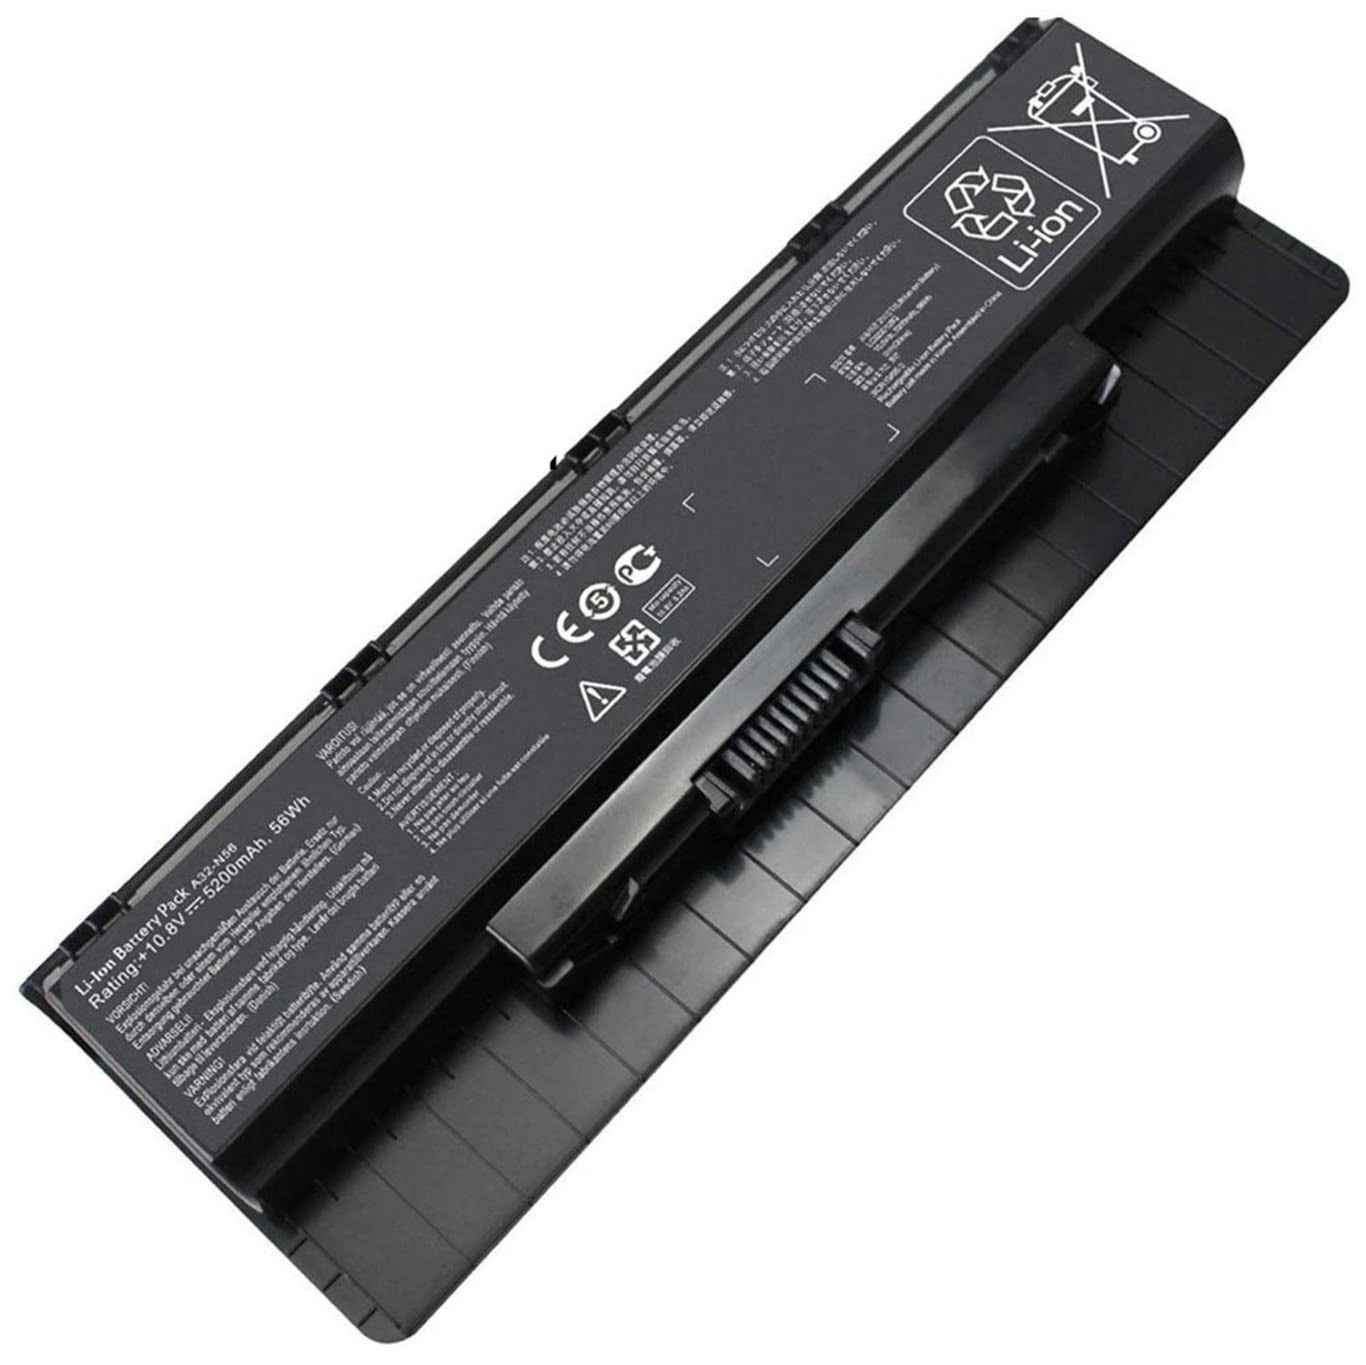 ROG Strix GL753VD-GC045T Laptop Batteries for Asus replacement